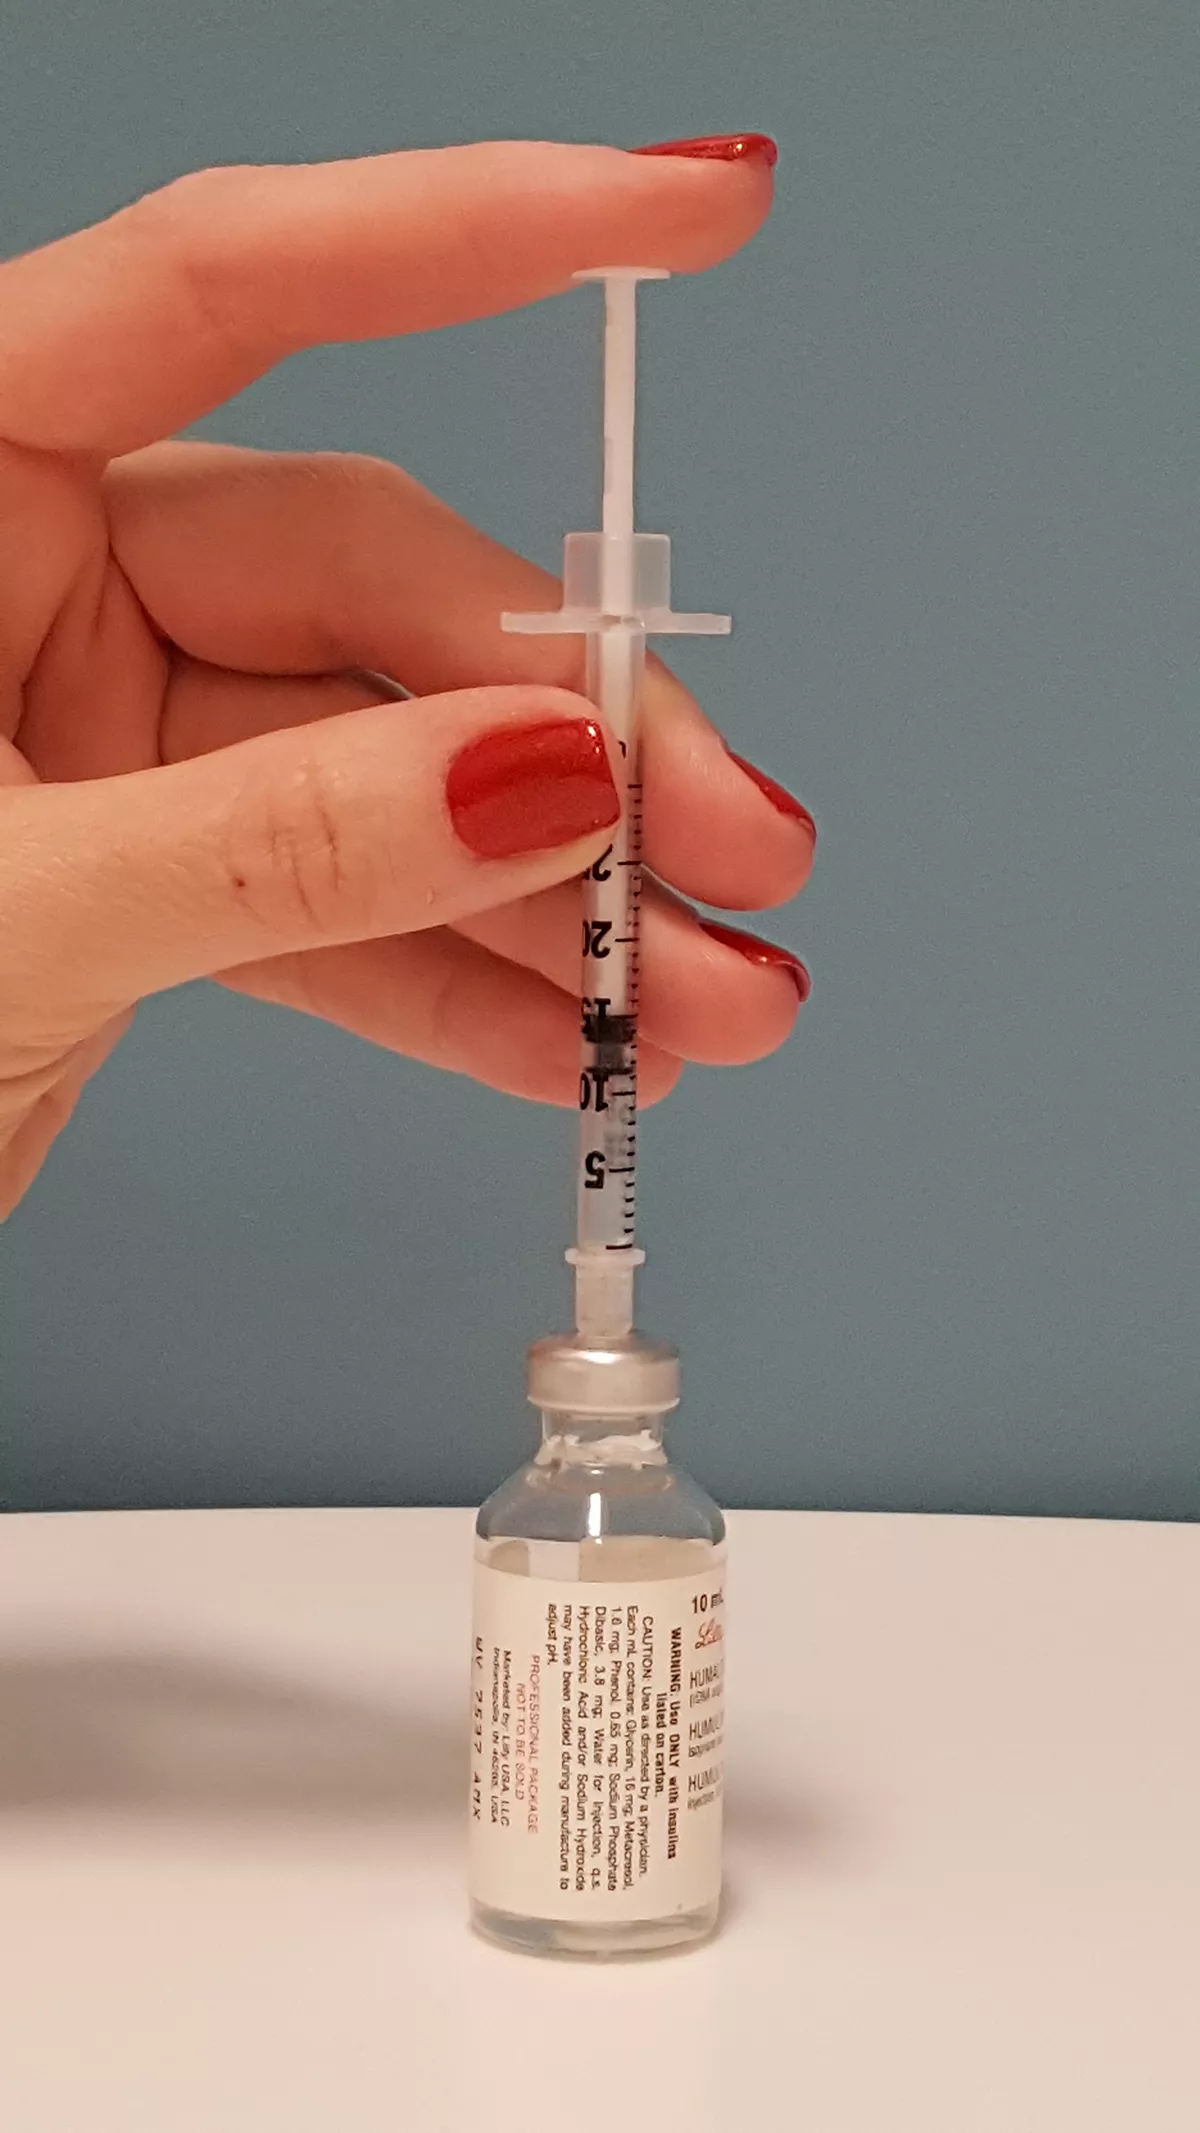 insulin injecting air into vial, photo